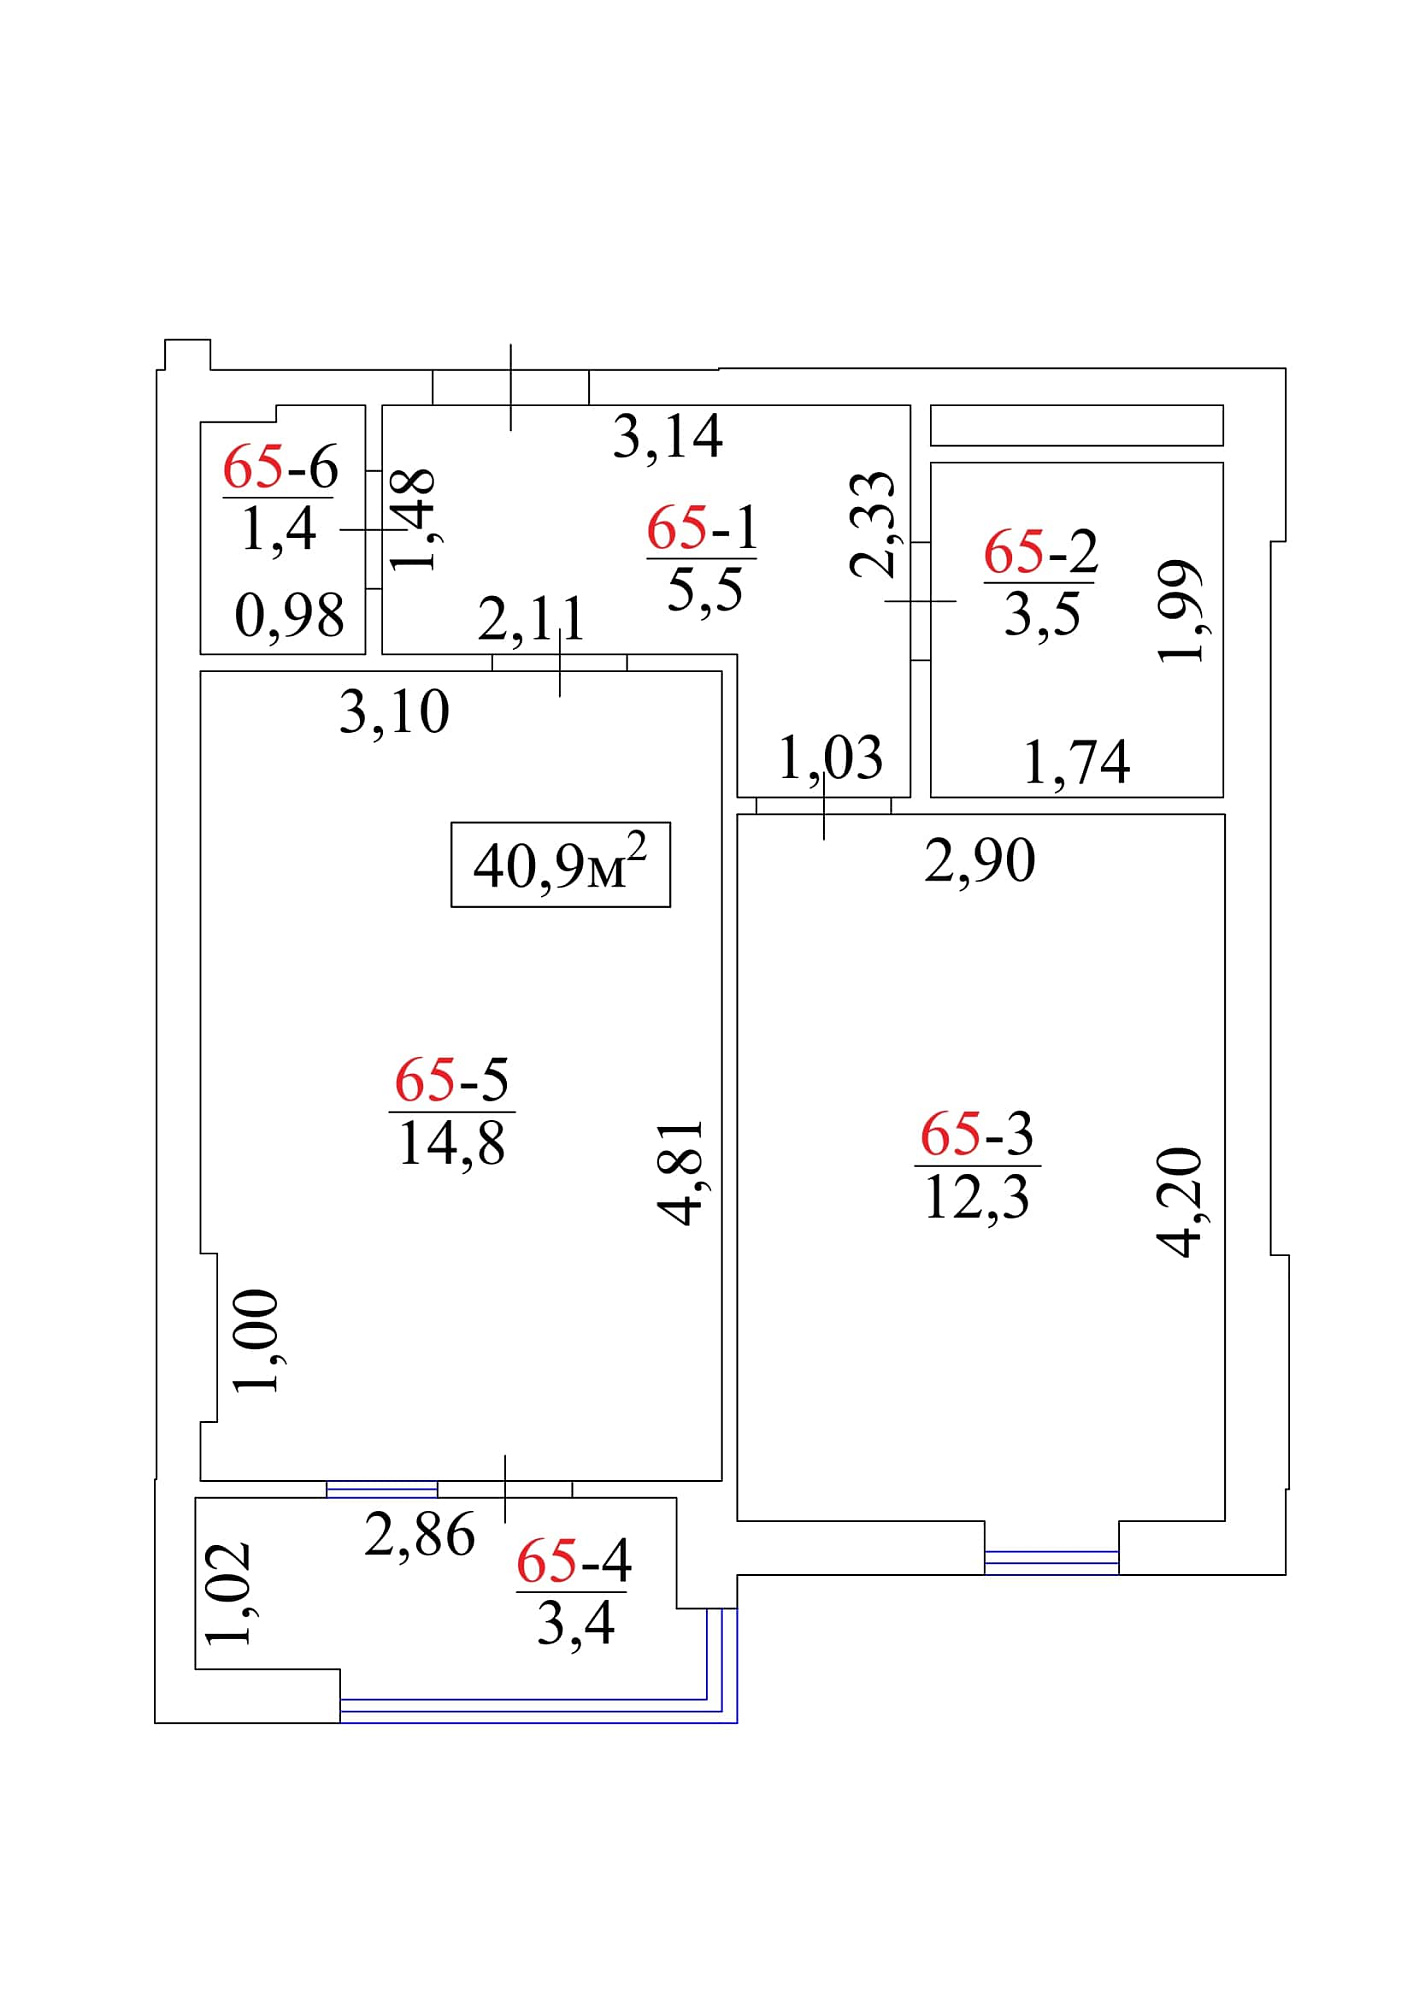 Planning 1-rm flats area 40.9m2, AB-01-07/00061.